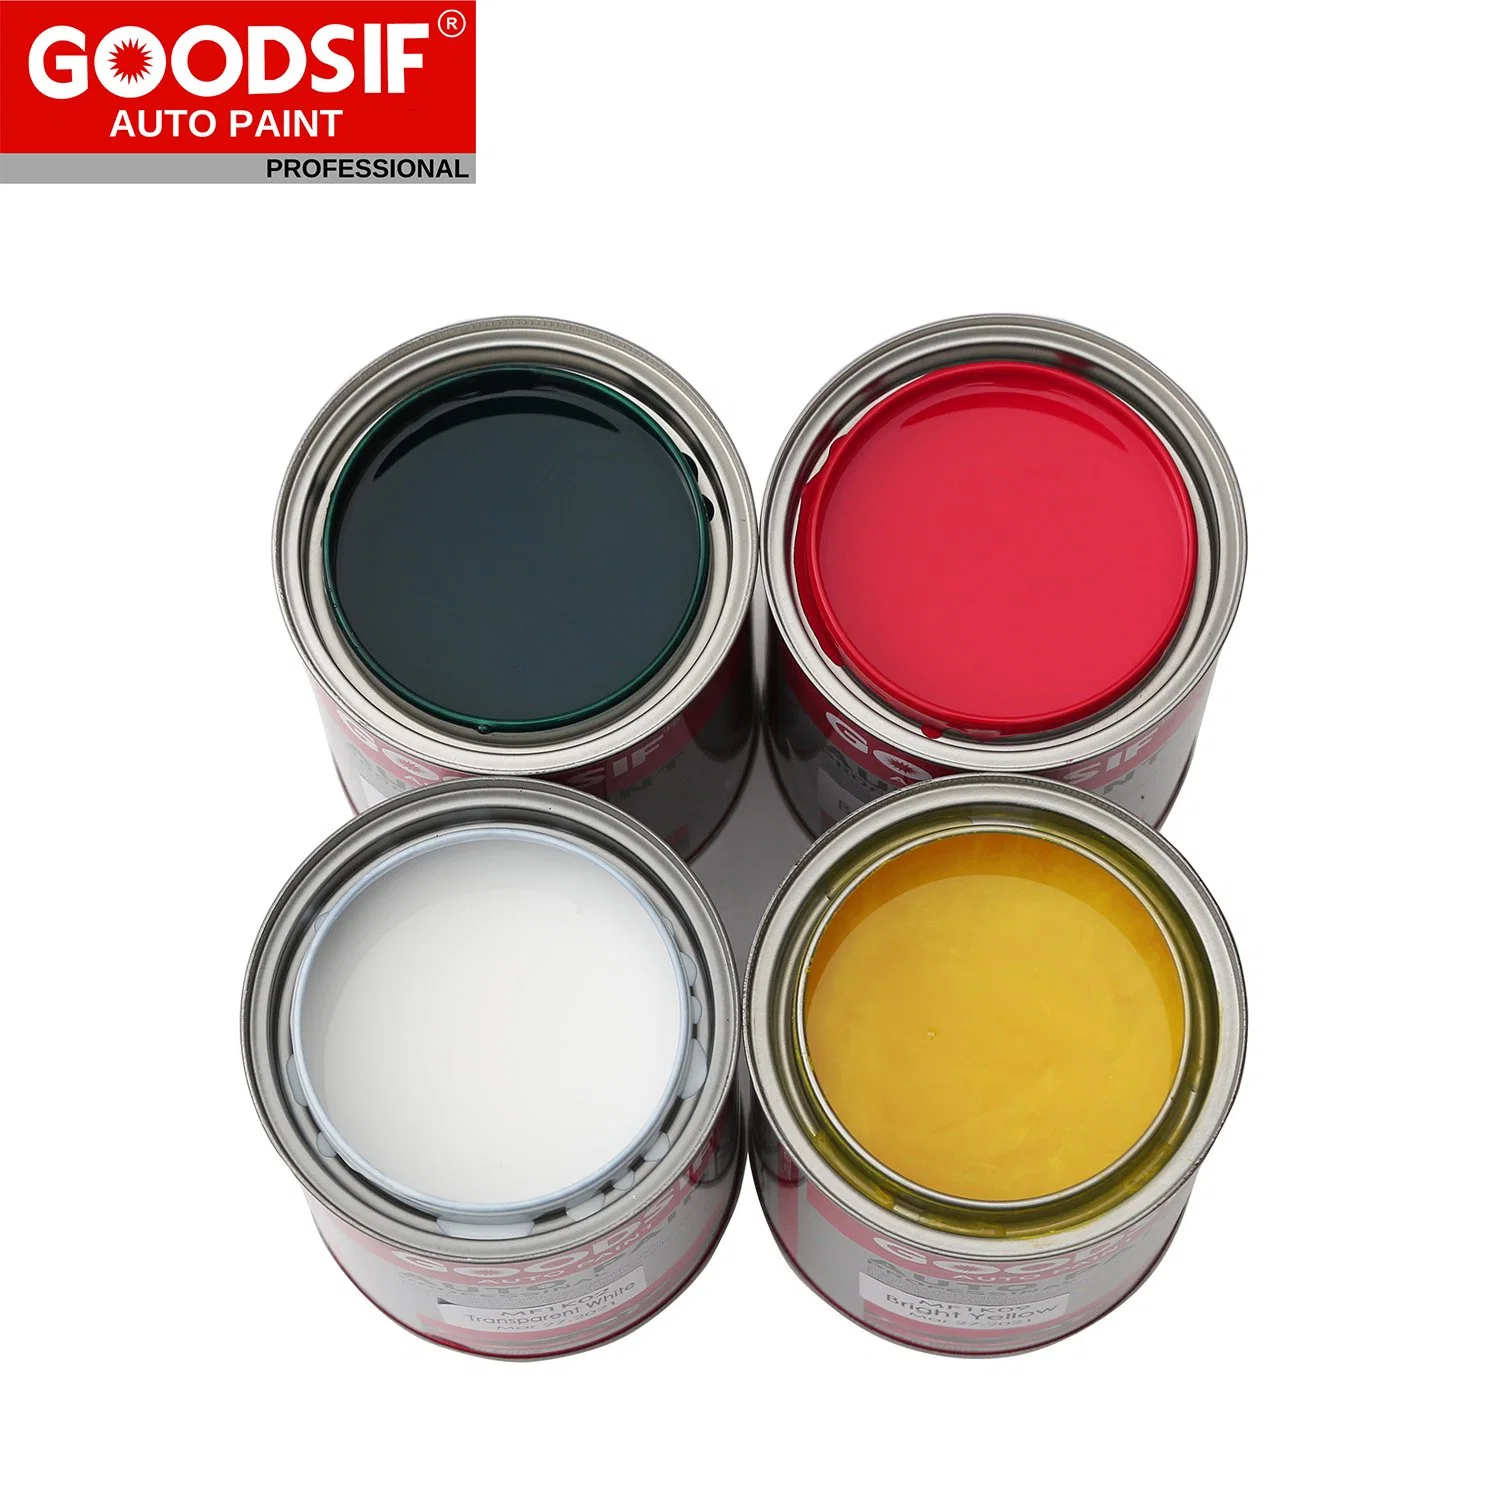 Auto Paint Manufacturer Goodsif Brand Company in China Supply Automotive Refinish Coating Repair Epoxy Primer Paint for Car